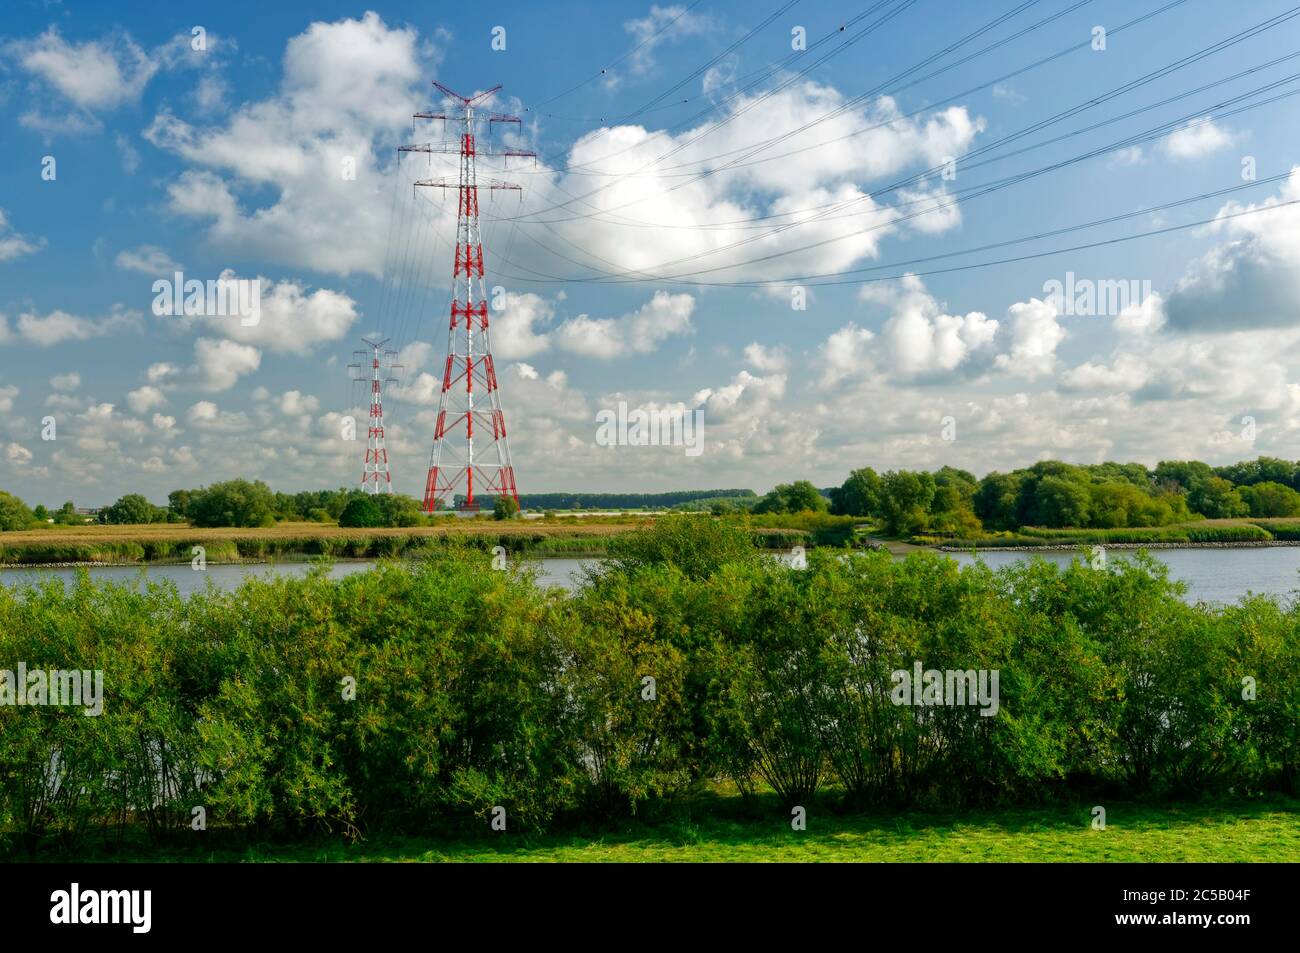 Elbe crossing 1: transmission tower on river Elbe, view from southern riverside near Twielenfleth, Lower Saxony, Germany Stock Photo